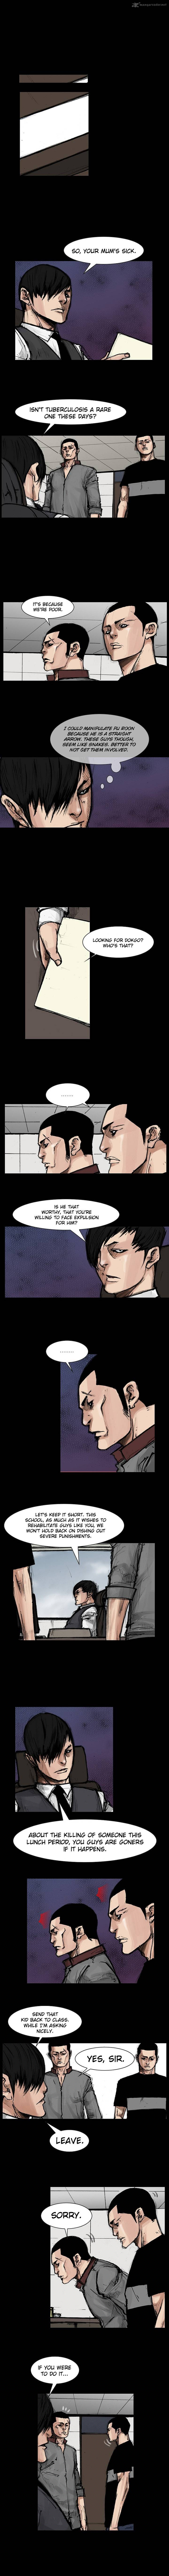 Dokgo 2 Chapter 52 Page 4